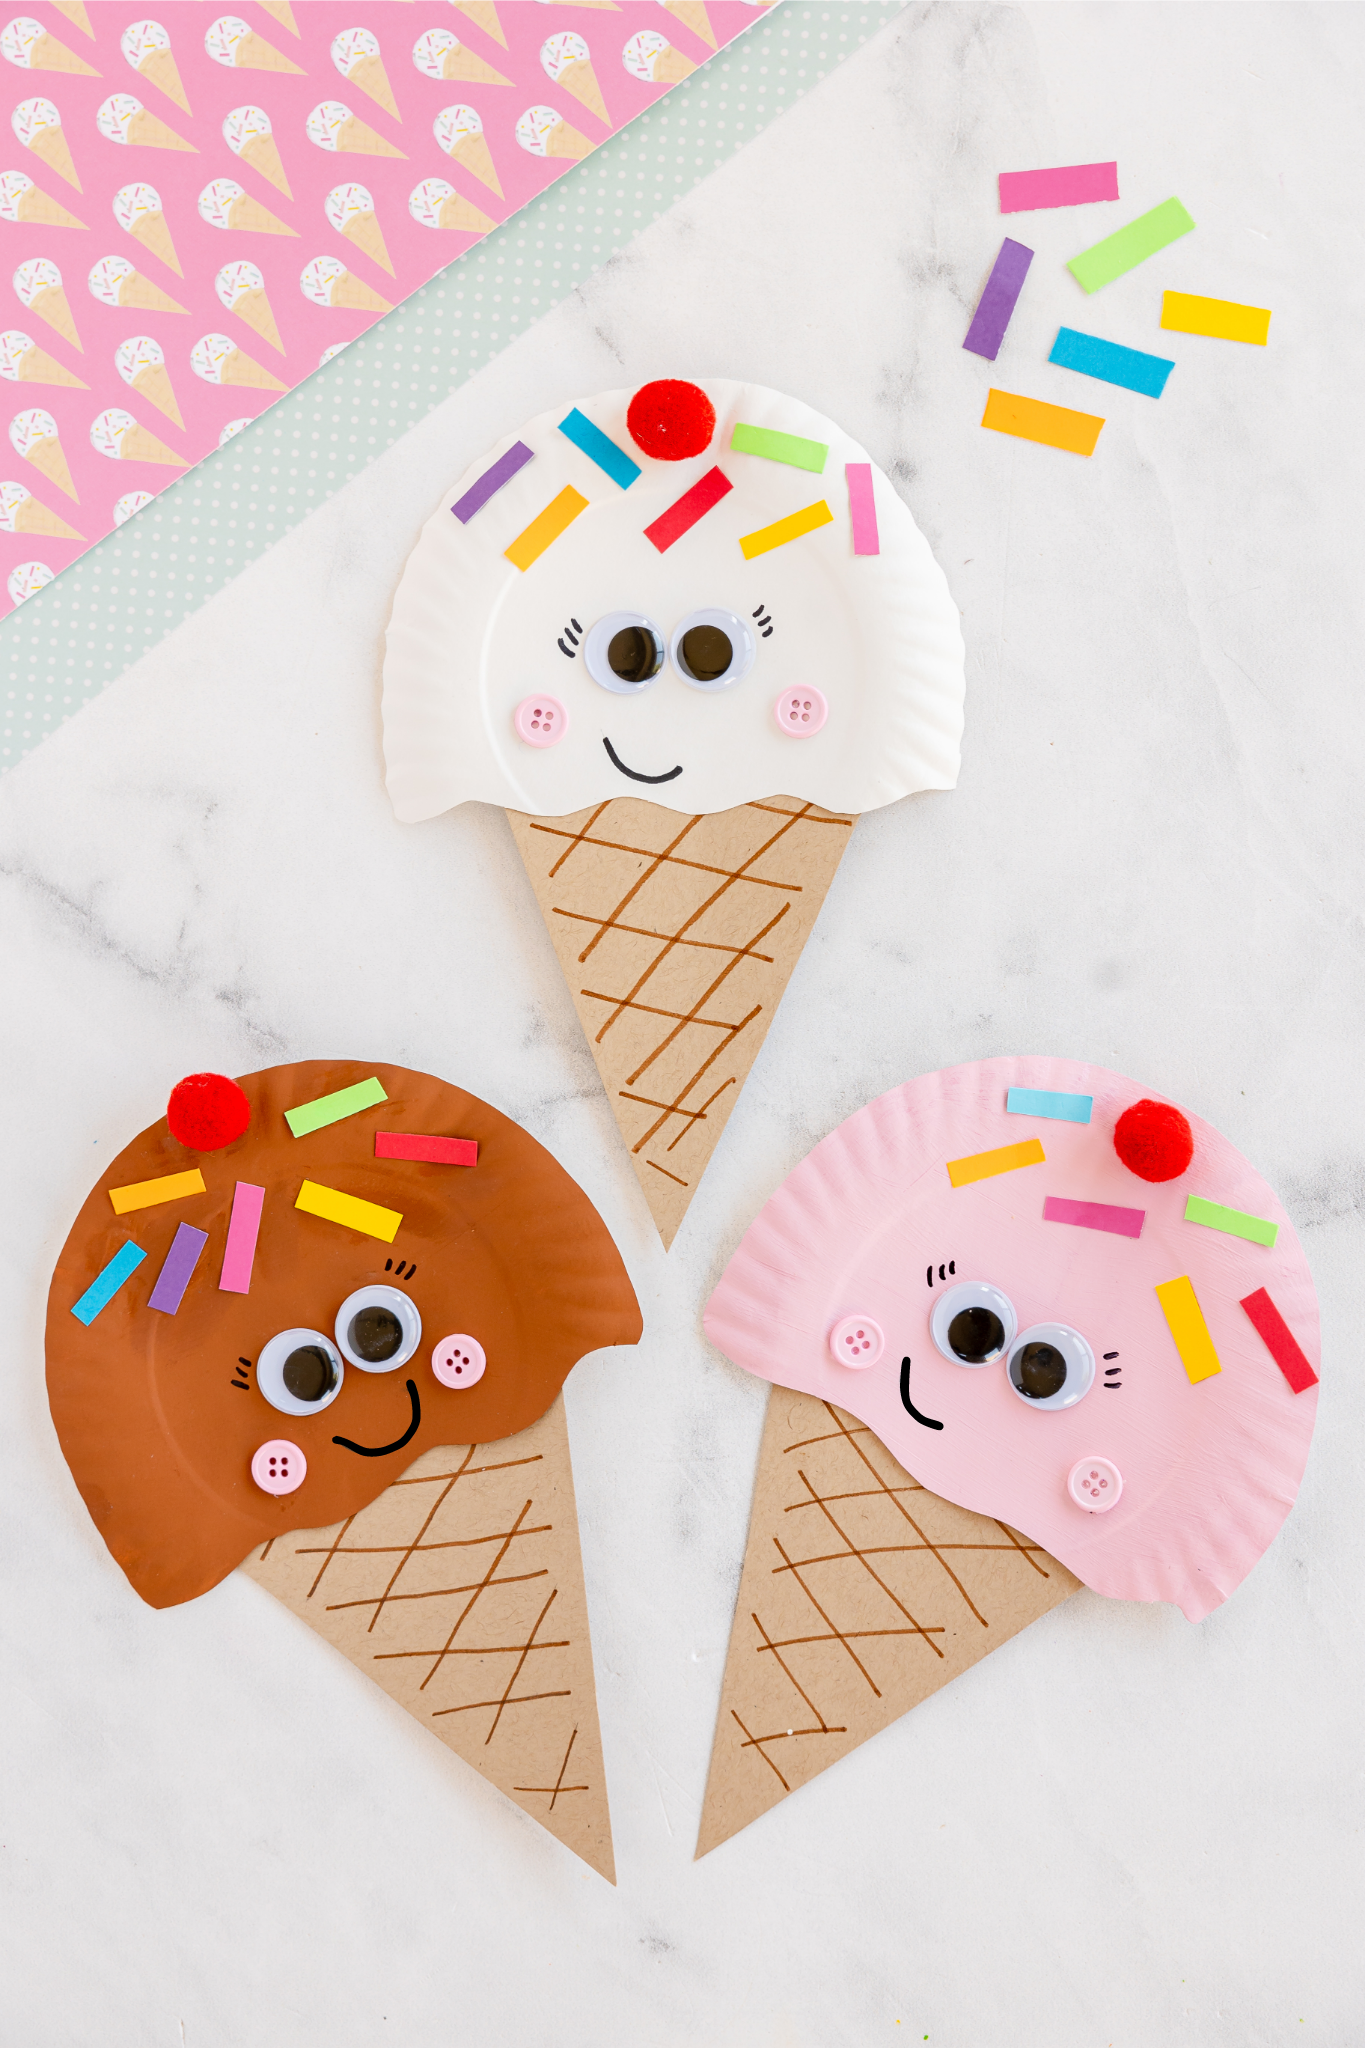 ice cream cones made with paper plates and construction paper